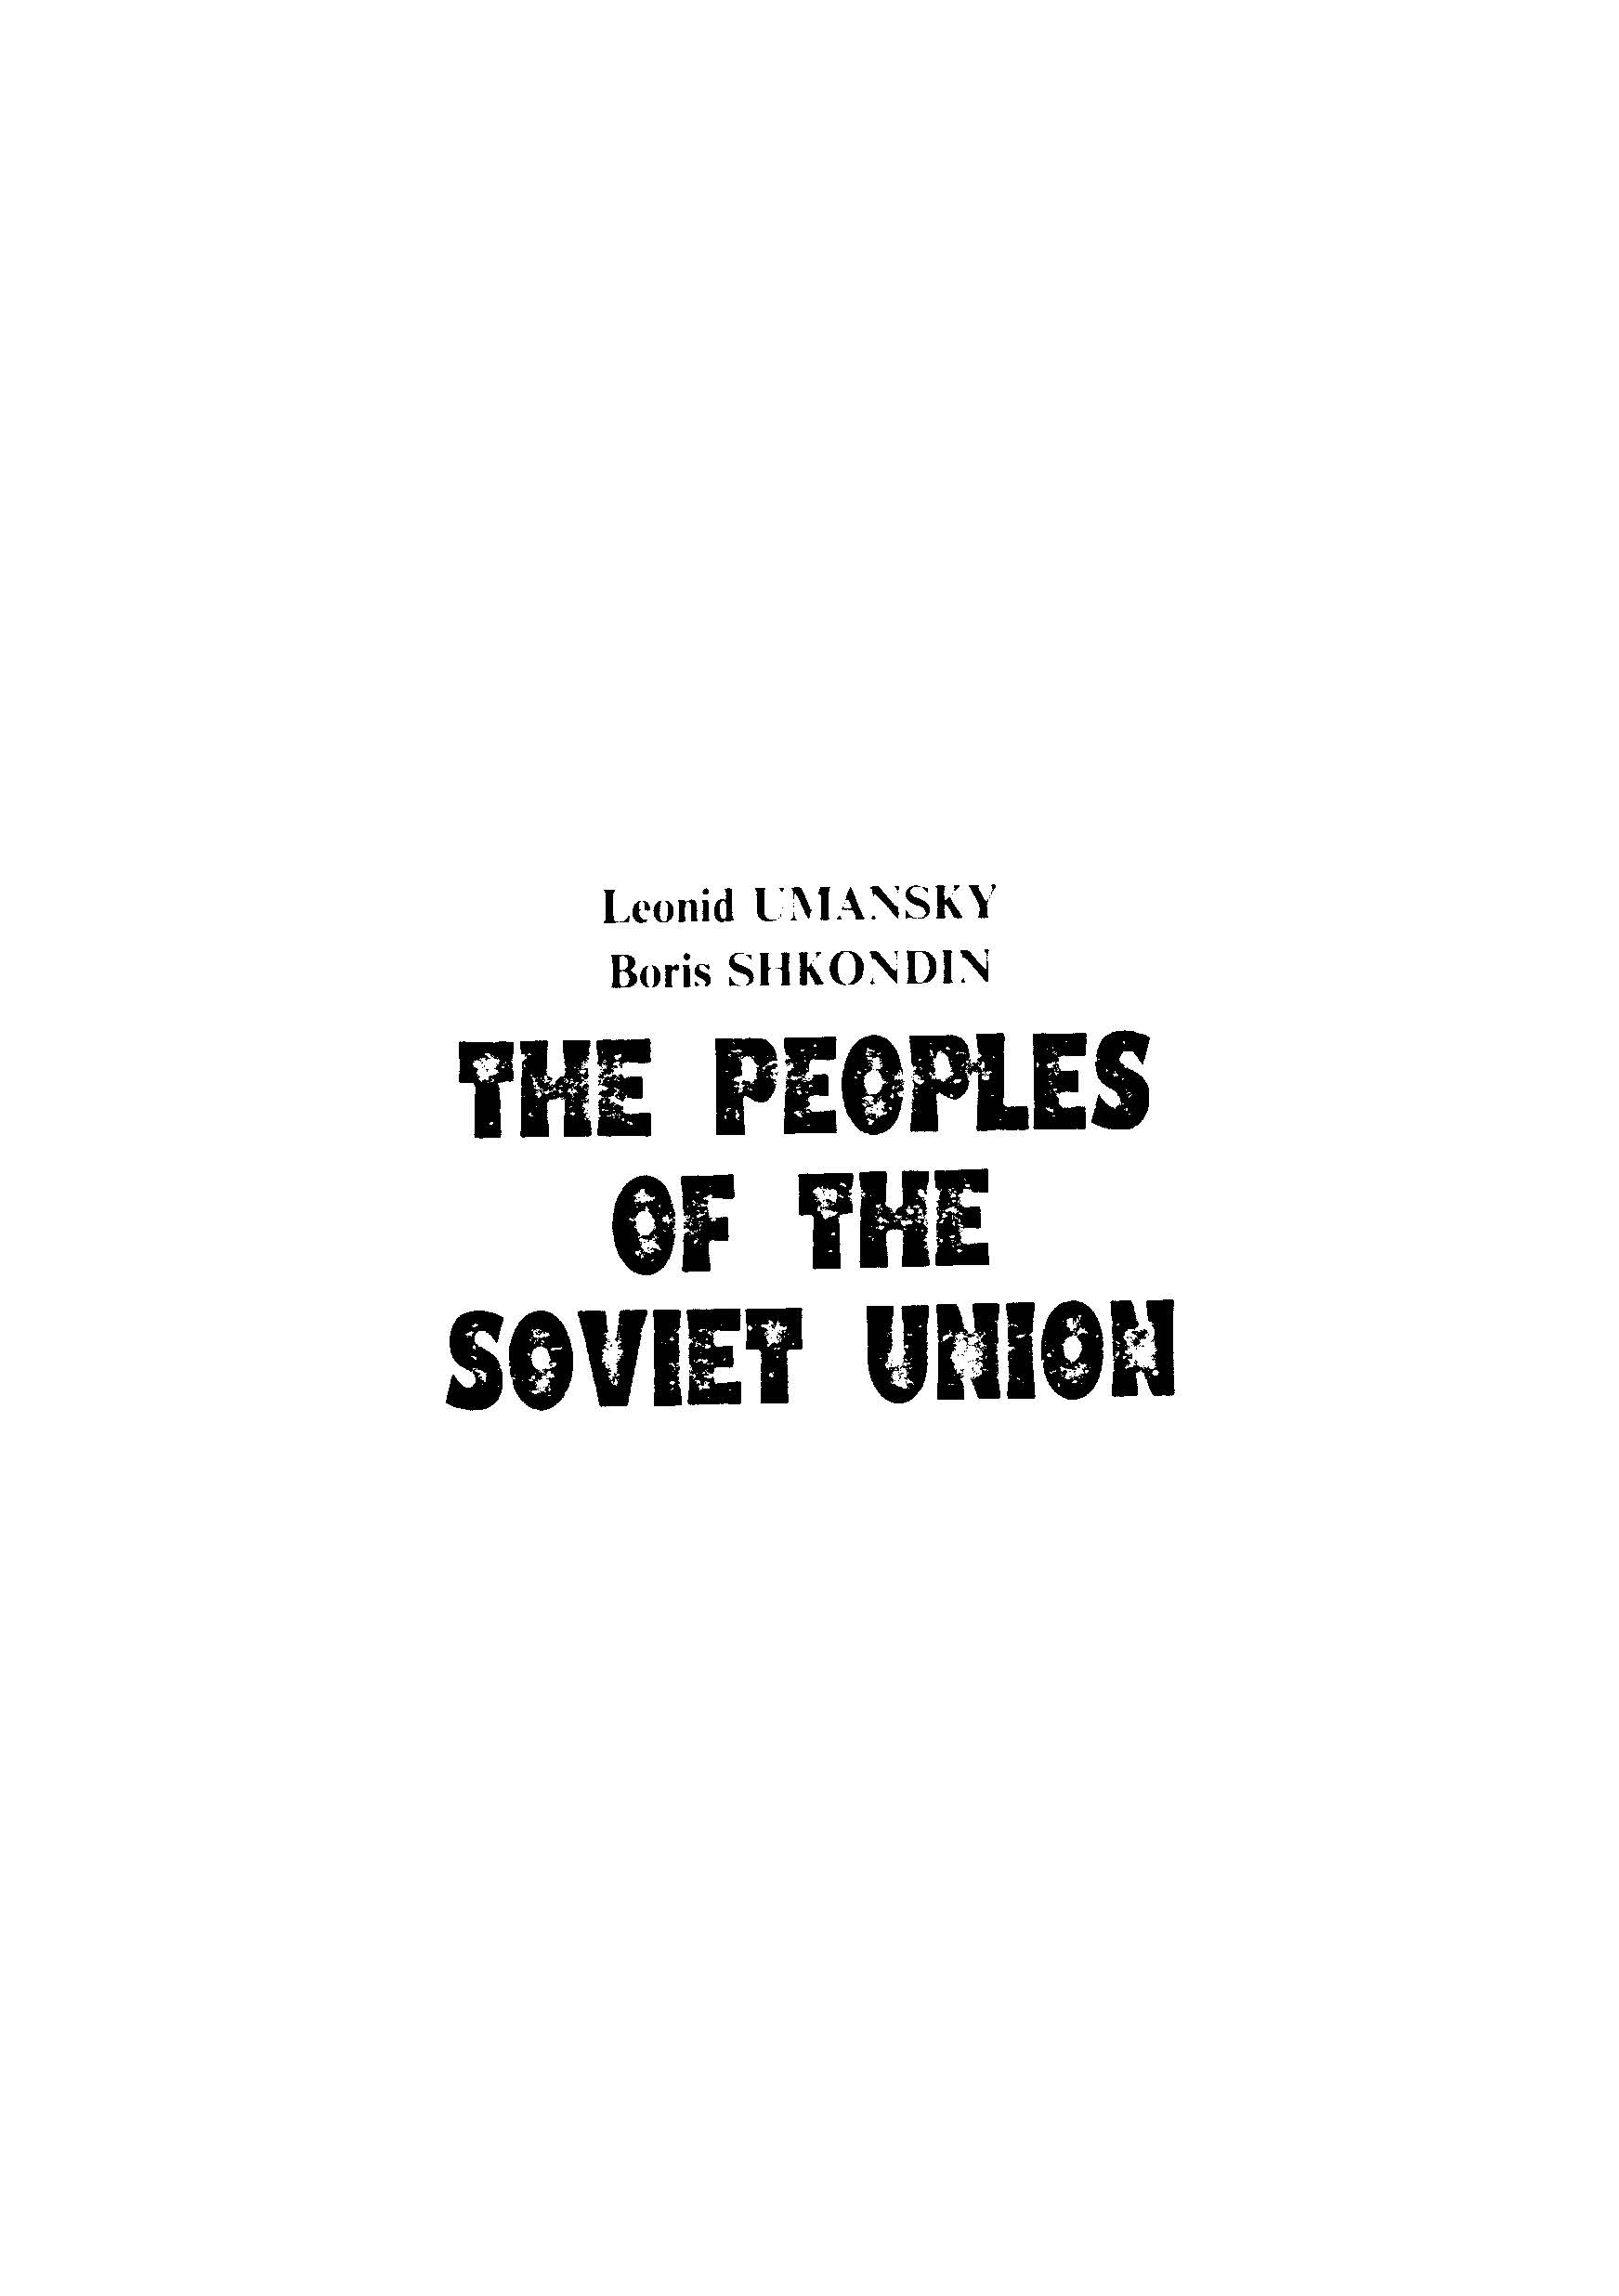 The peoples of the soviet union